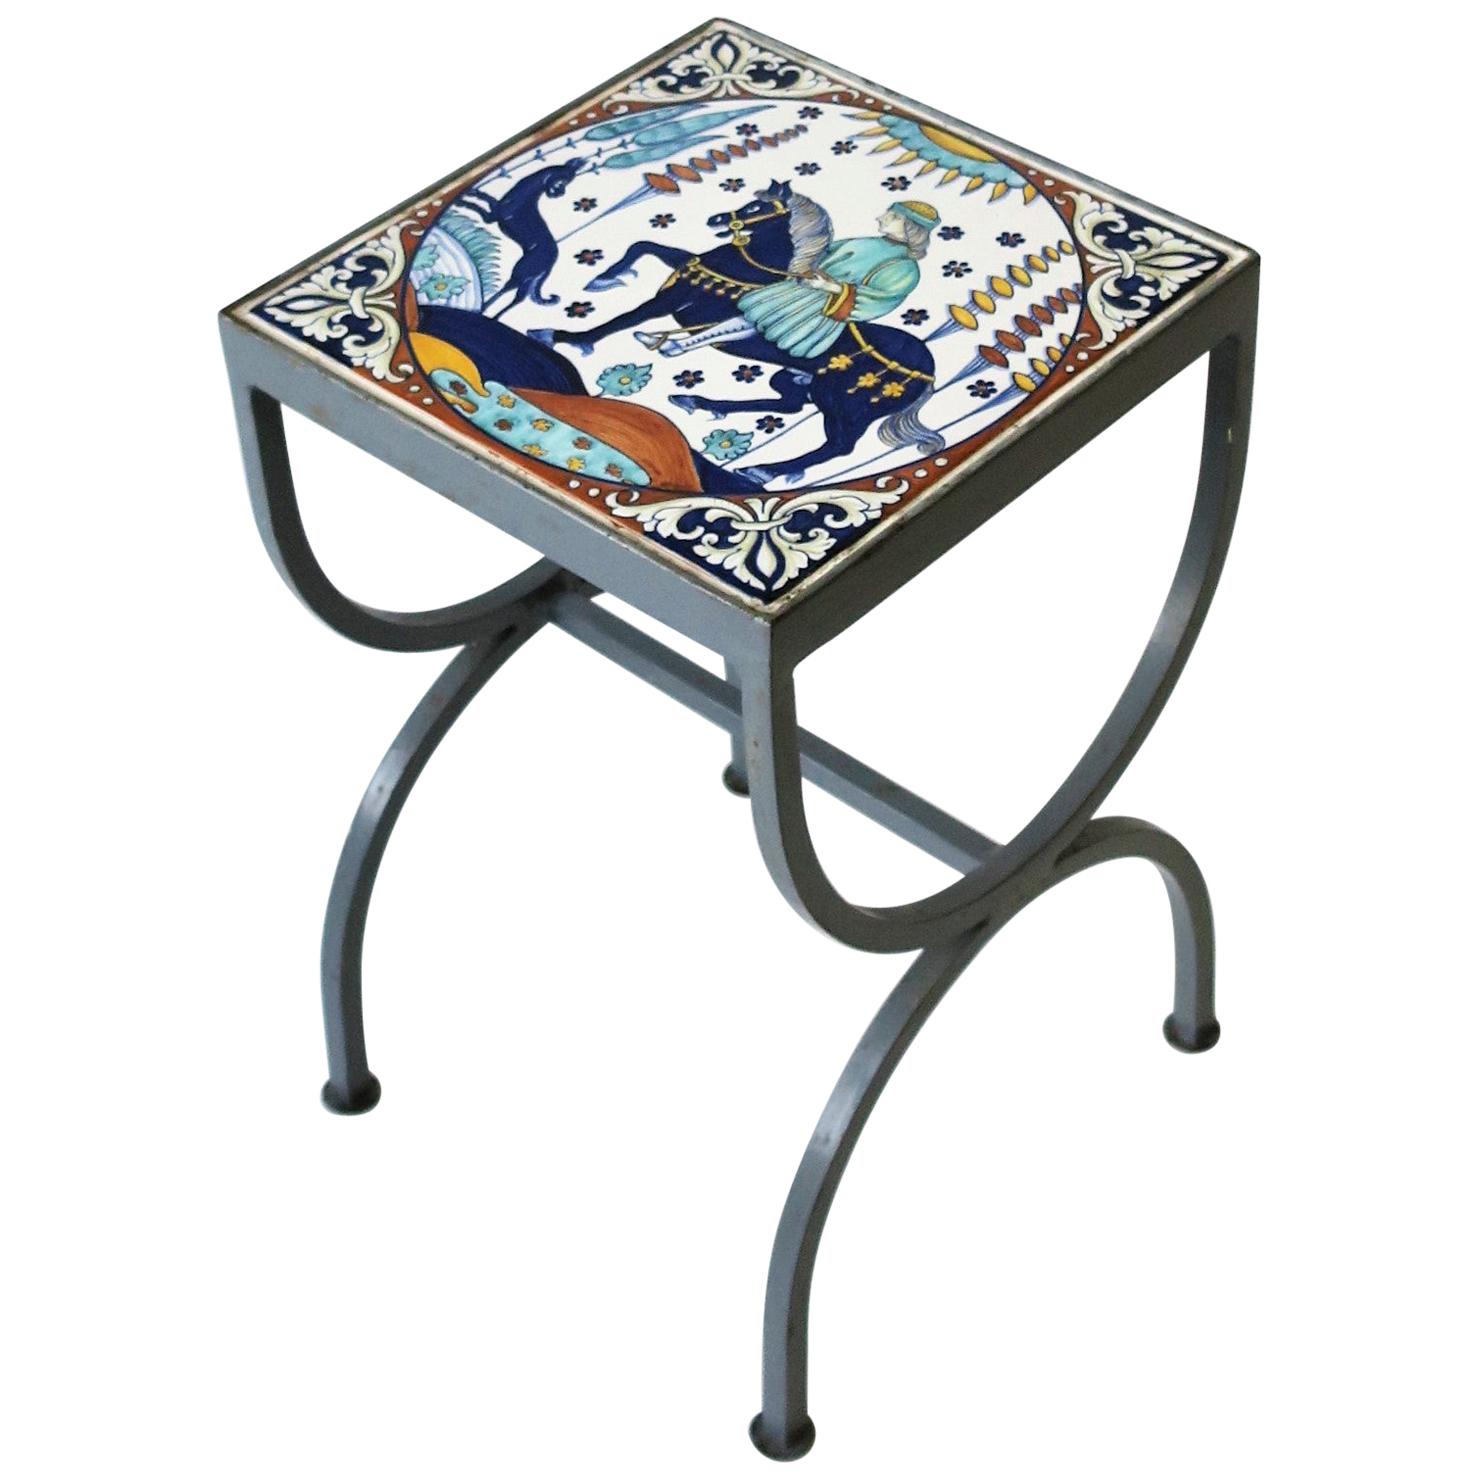 Tile Top Grey Metal Side or Drinks Table Indoors or Patio in the style of Hermes